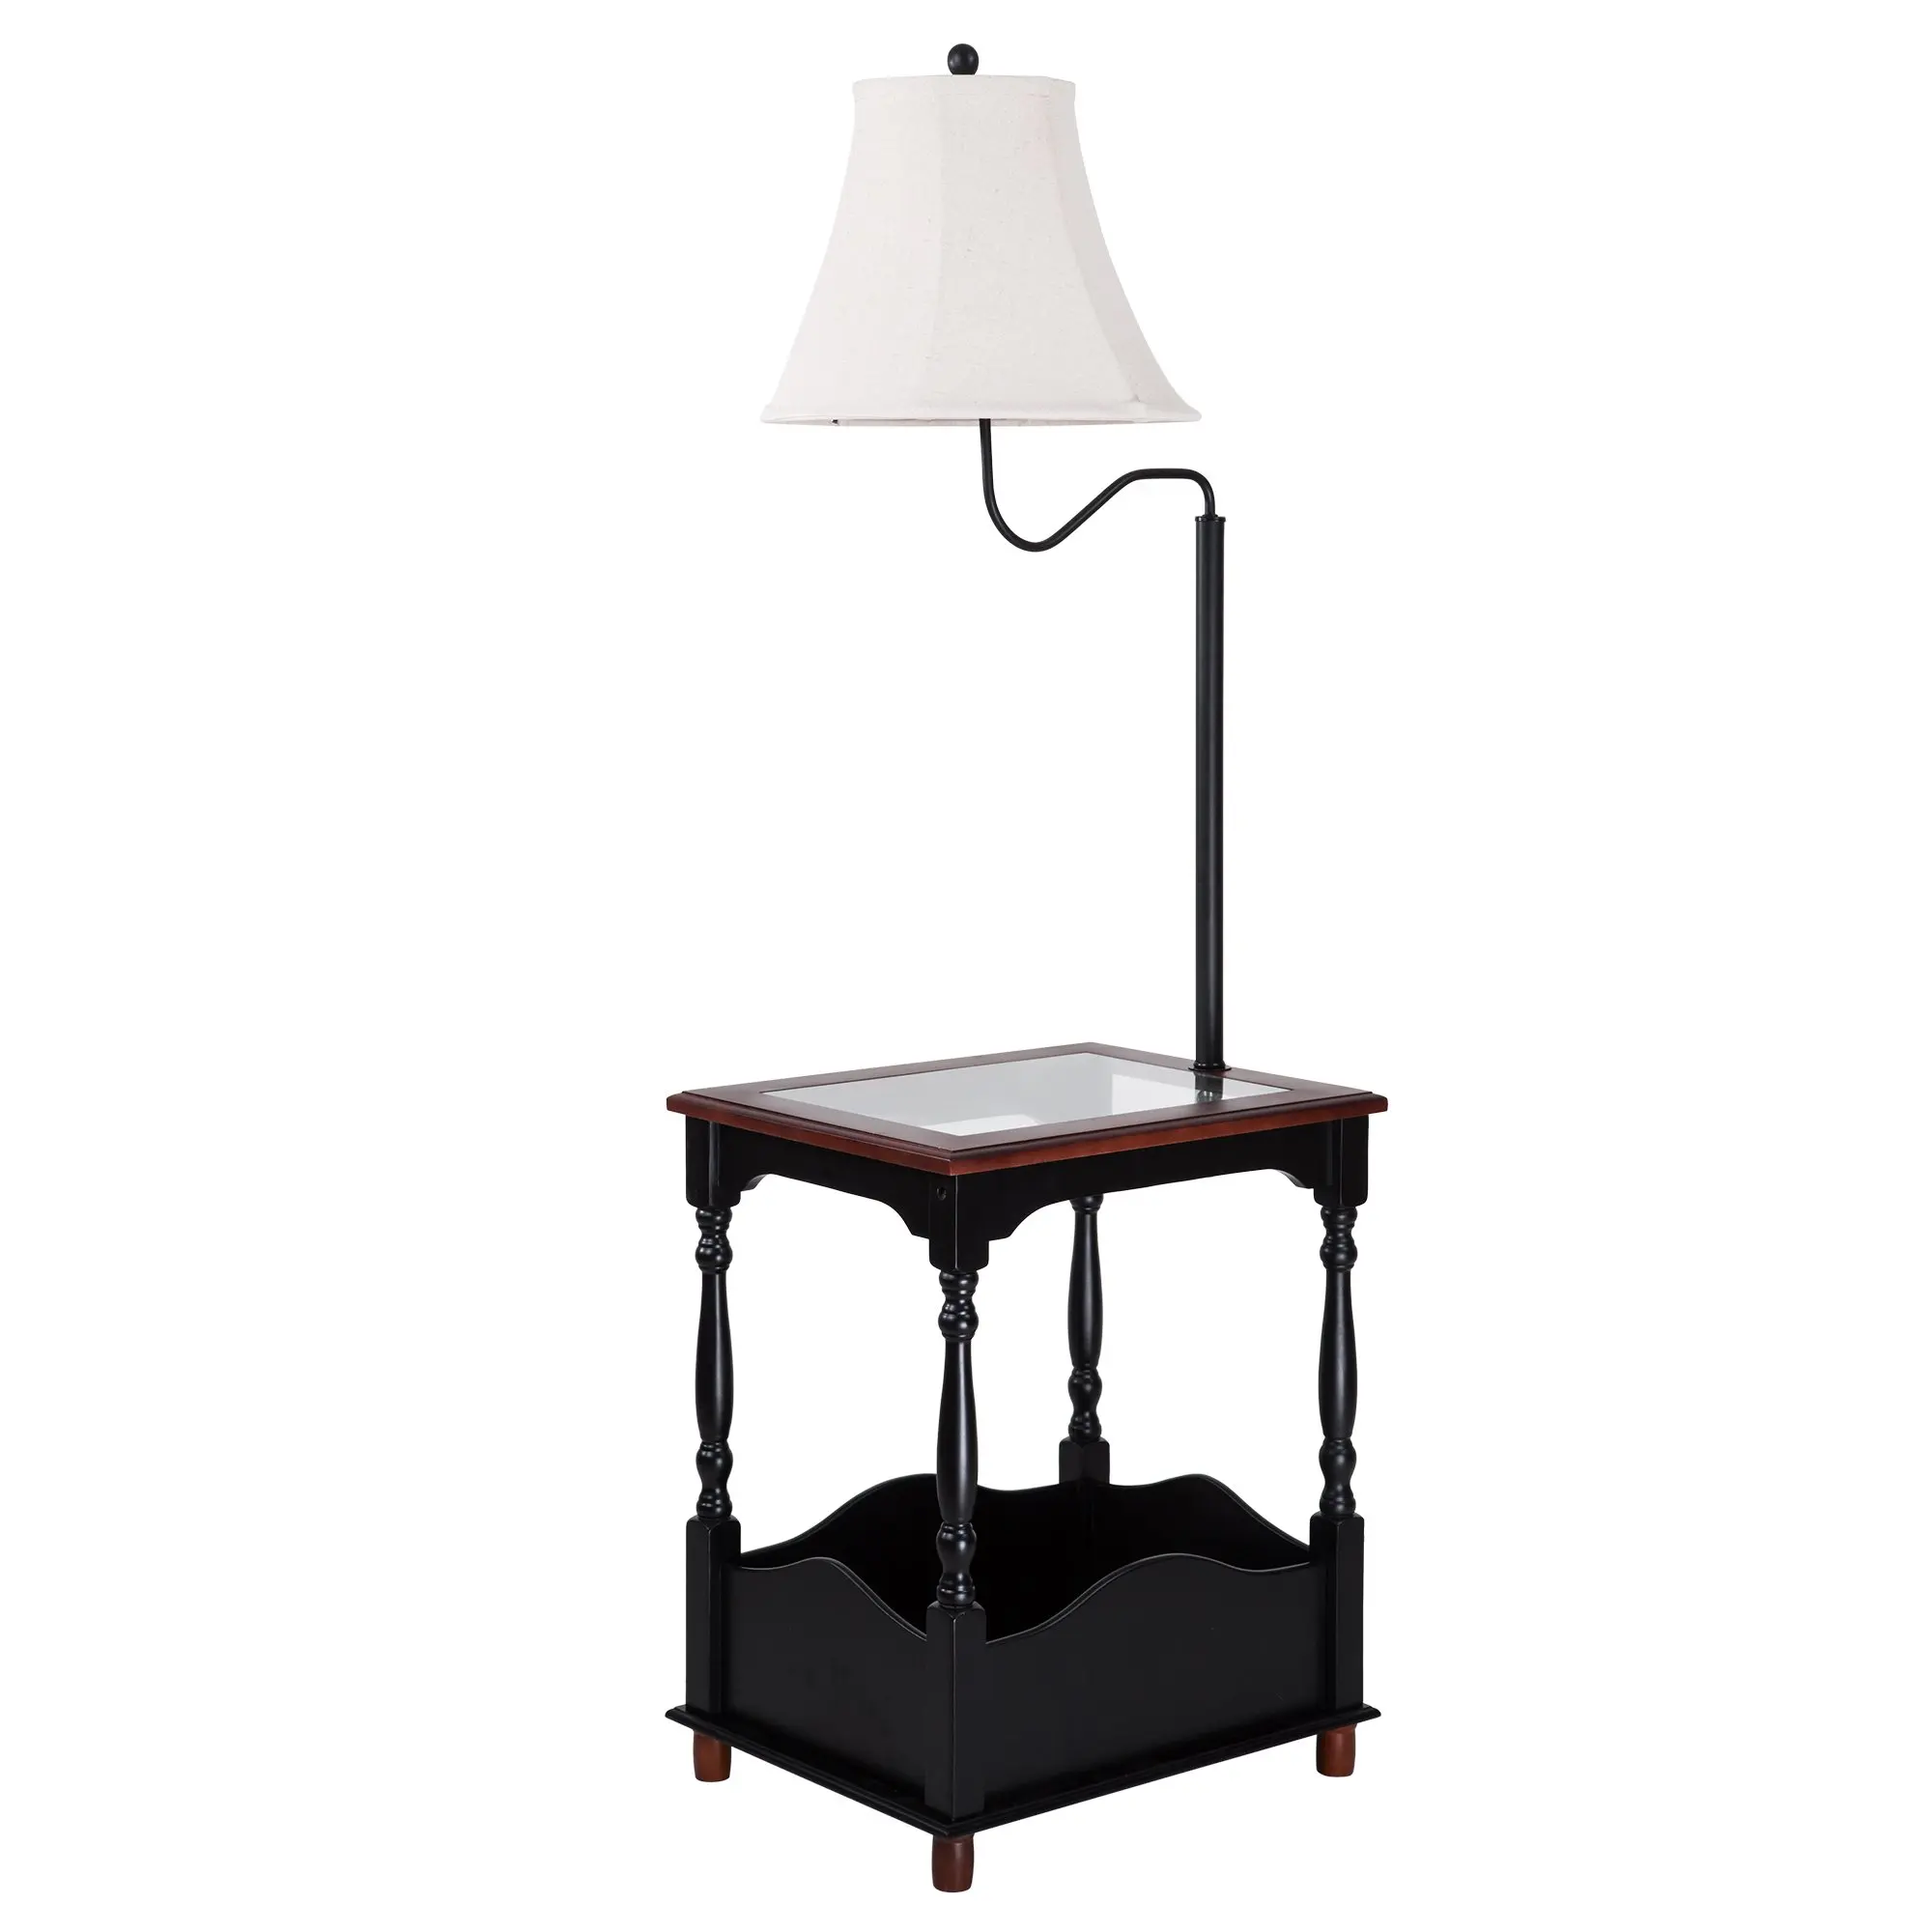 Buy Floor Lamp with Toughened Glass Top Table and Built-in Black Table